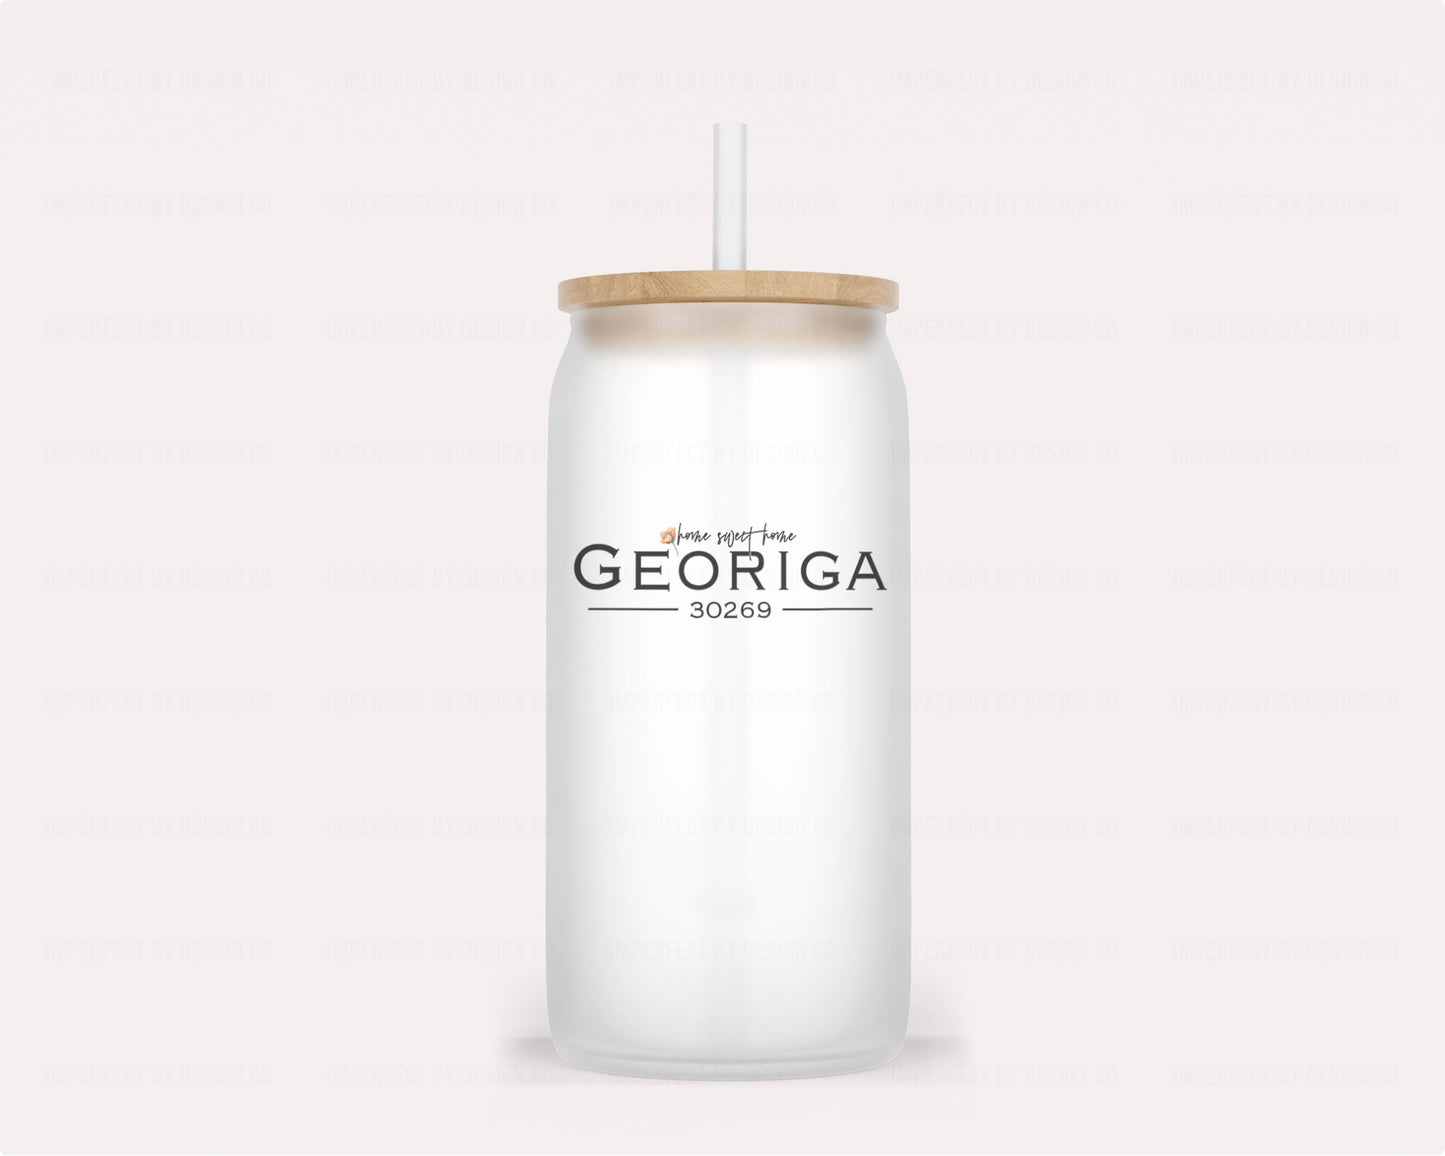 16oz Eco-friendly glass tumbler shaped like a soda can with "Home sweet home Georgia 30269" text and reusable plastic straw | imperfect by design co